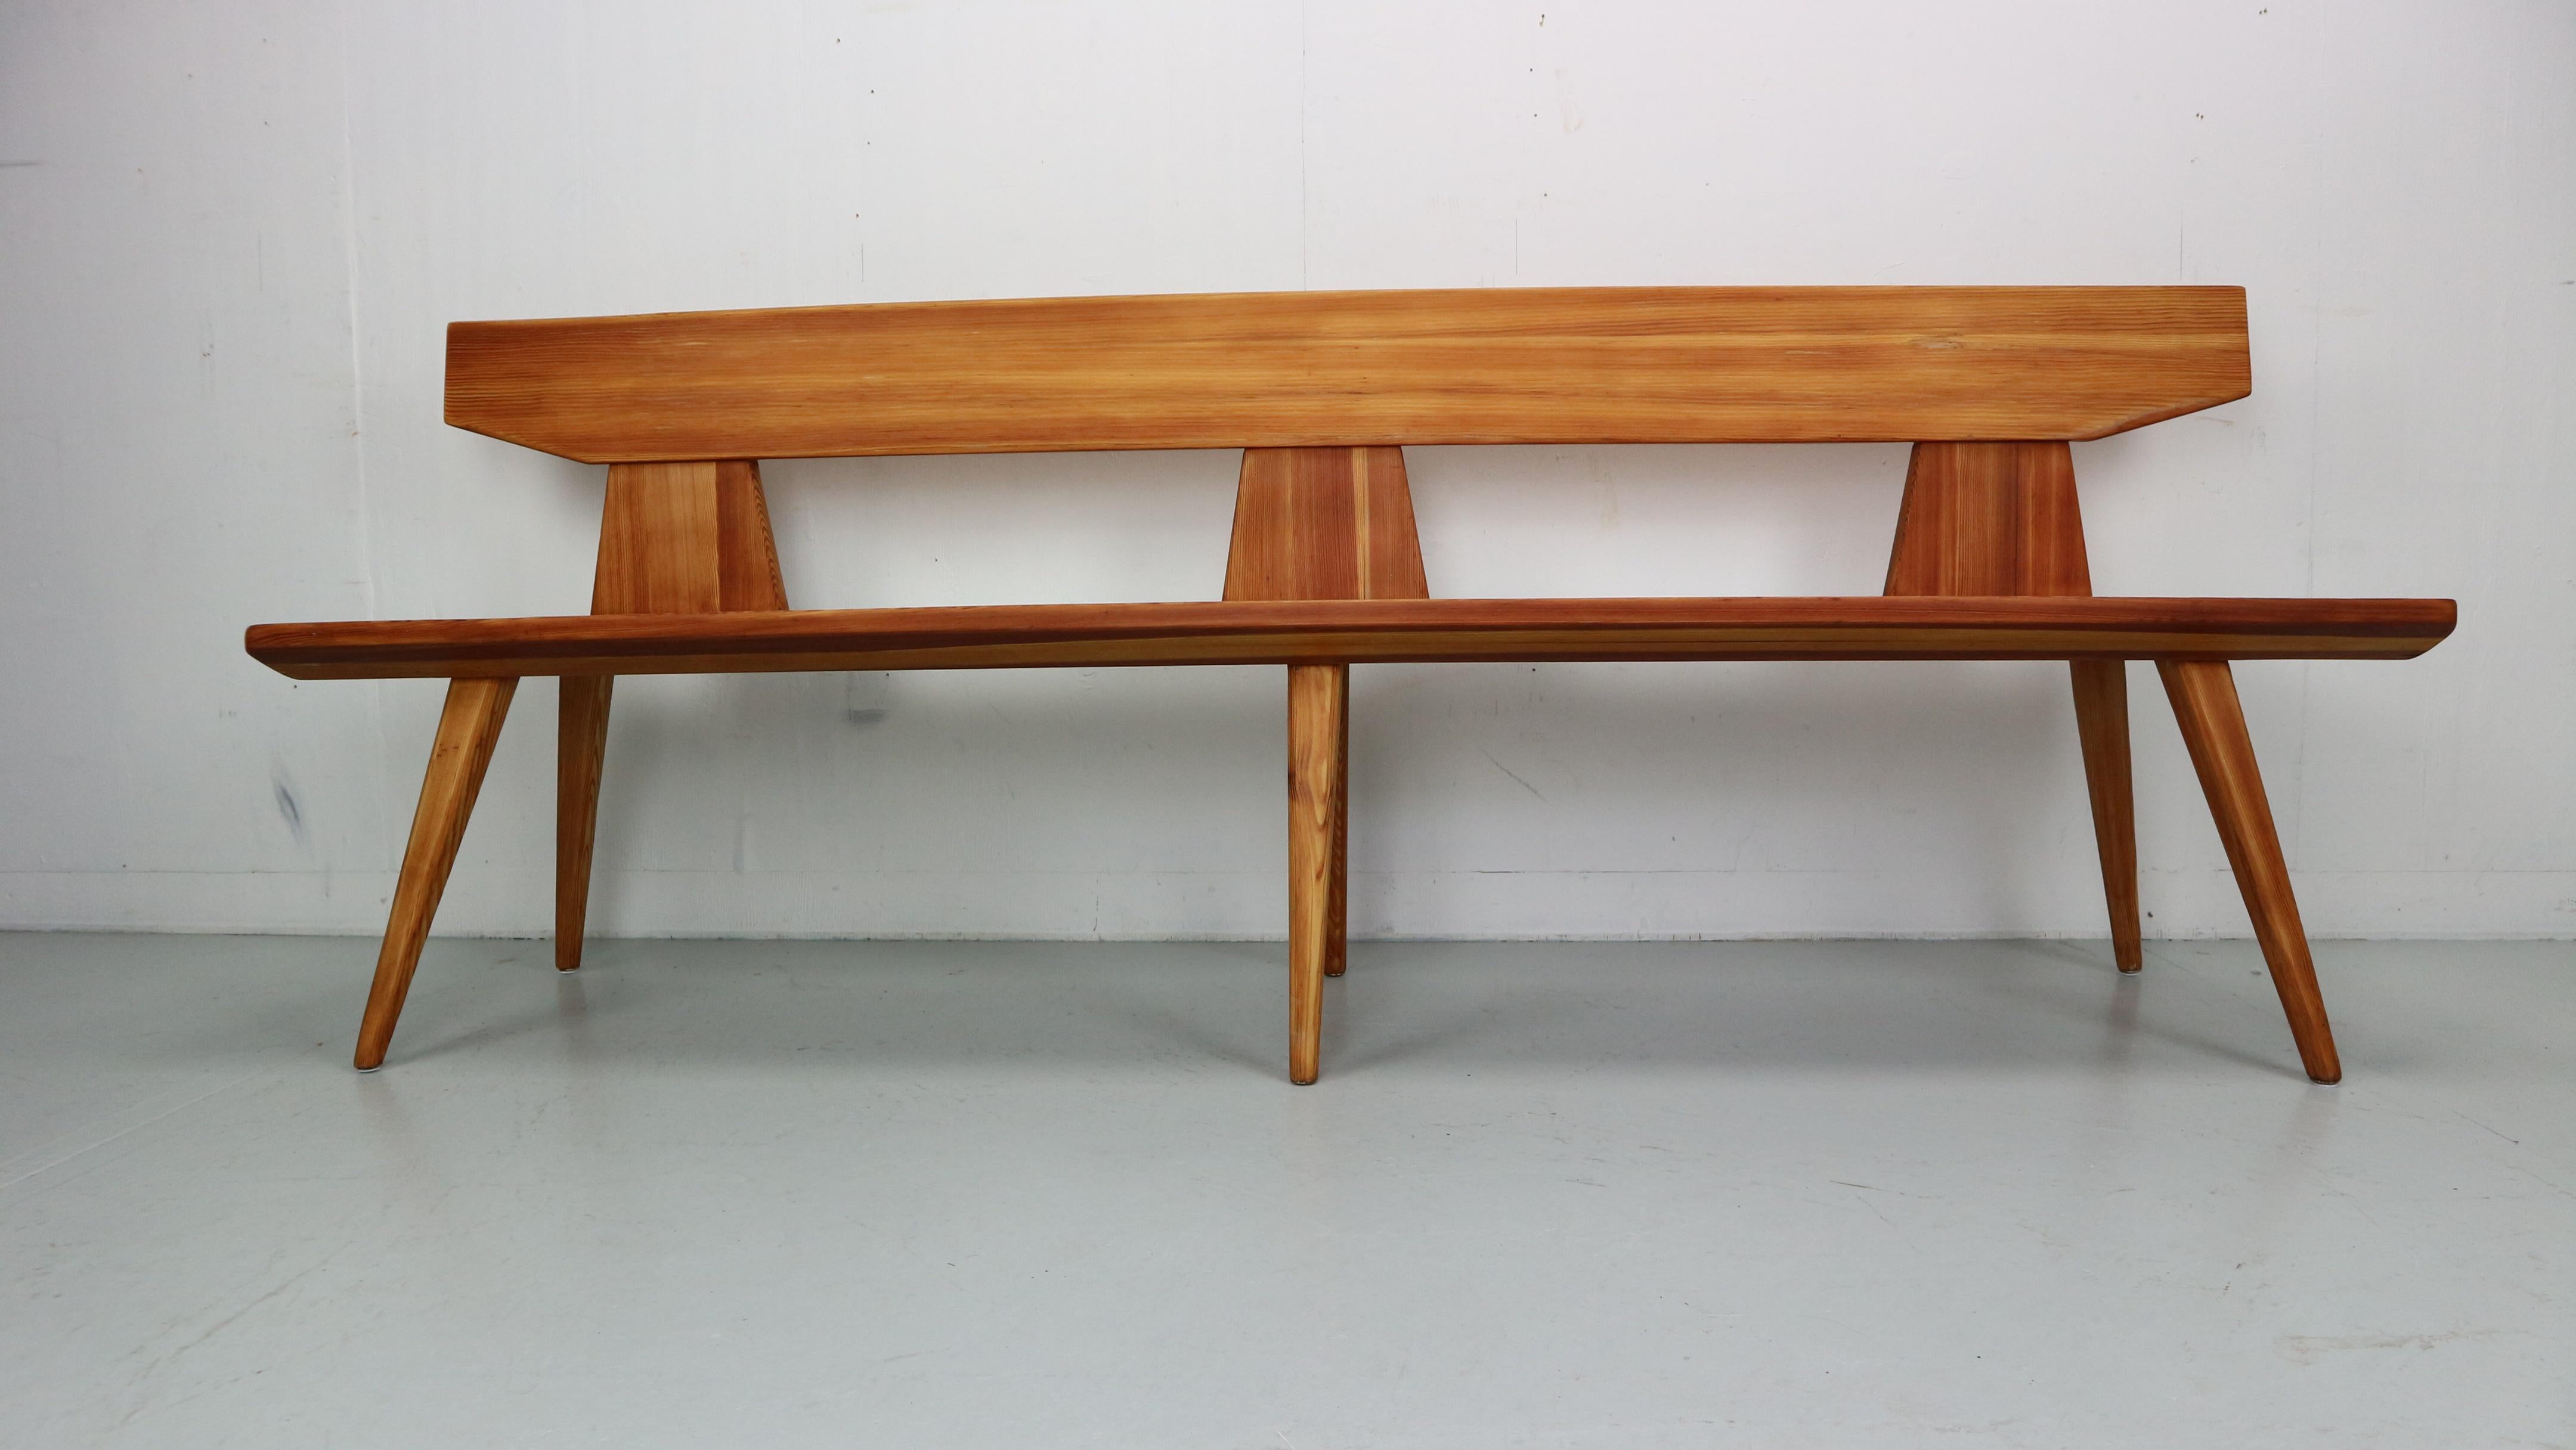 Handcrafted pine wooden bench by Jacob Kielland Brandt, 1960s for Christiansen Denmark.
This is a recognizable Scandinavian Modern period piece by it's specific shape, elegant curves and construction method.
The designer won the Cabinetmaker Guild